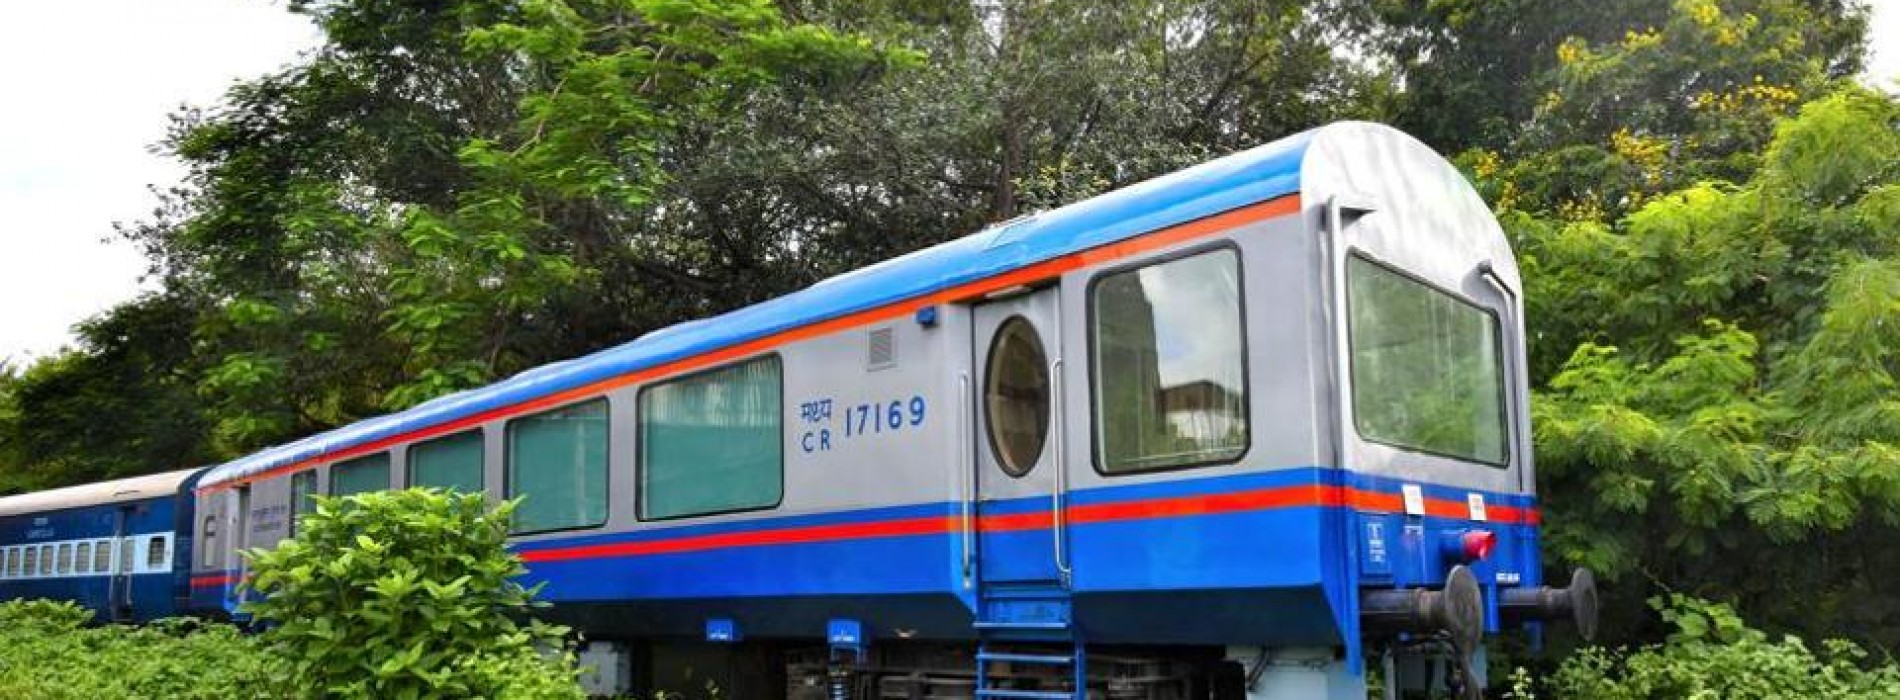 Indian Railways to introduce scenic trains to promote tourism